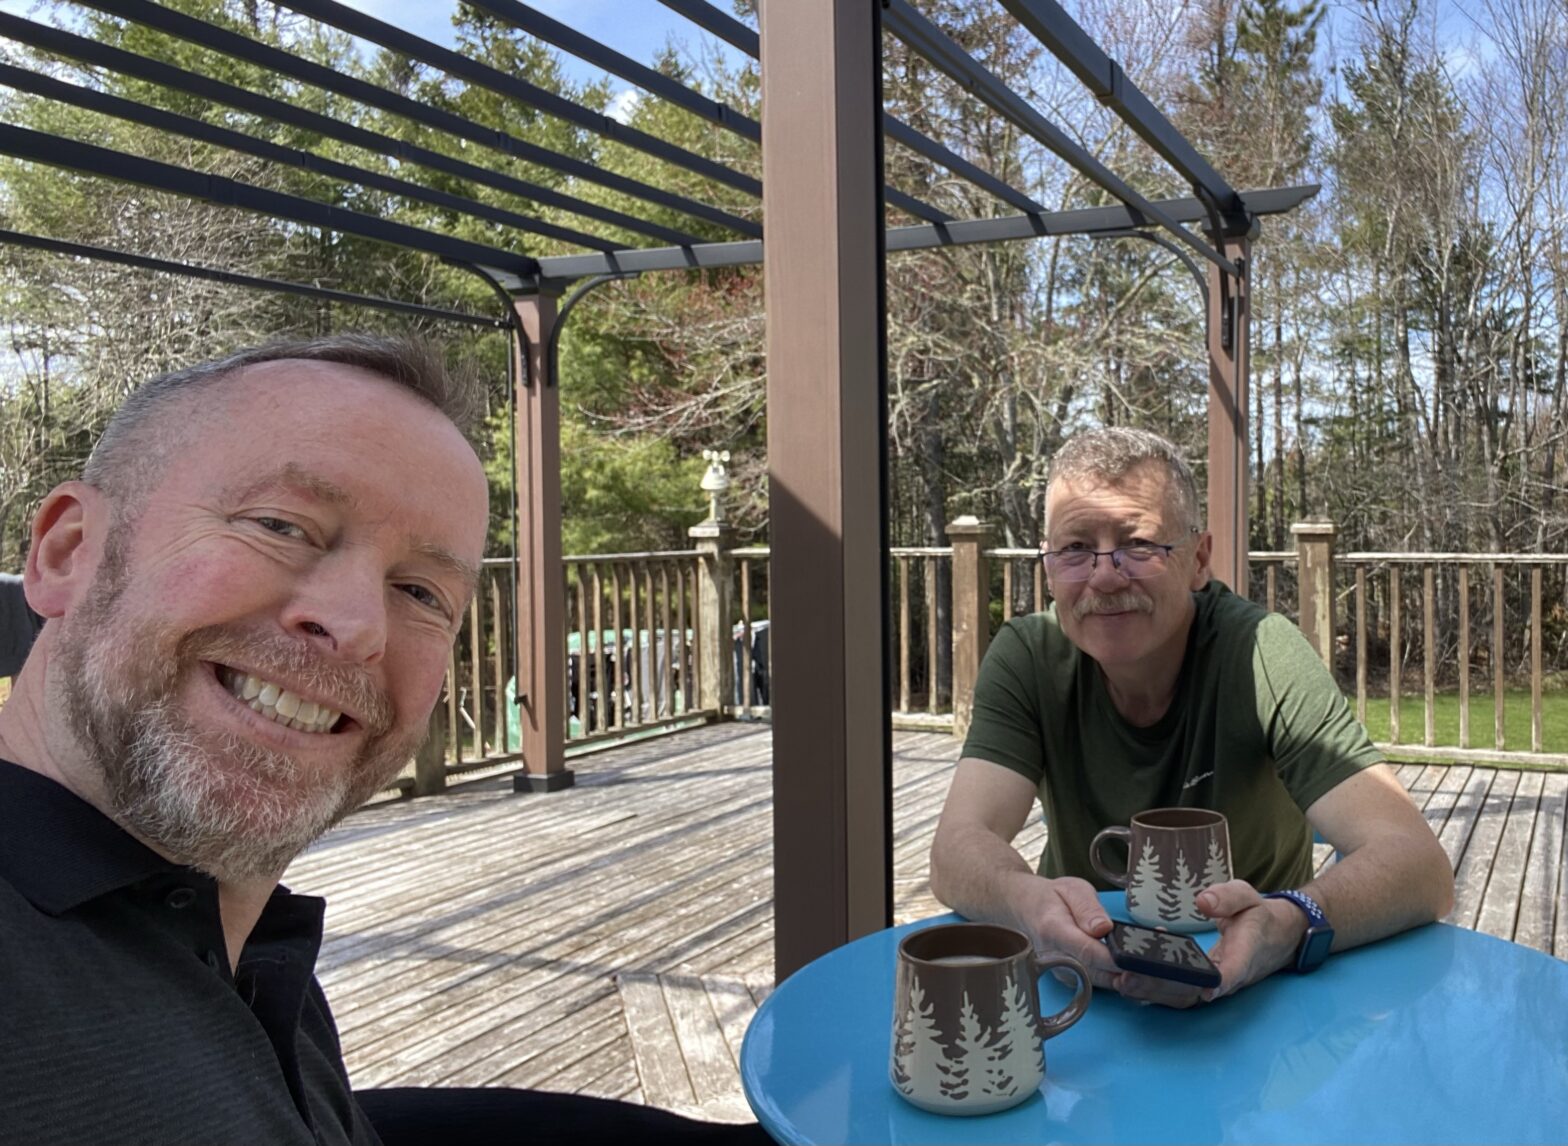 Two white guys in their 50s having coffee on a deck. Gazebo behind them. Sat at a blue metal patio table.